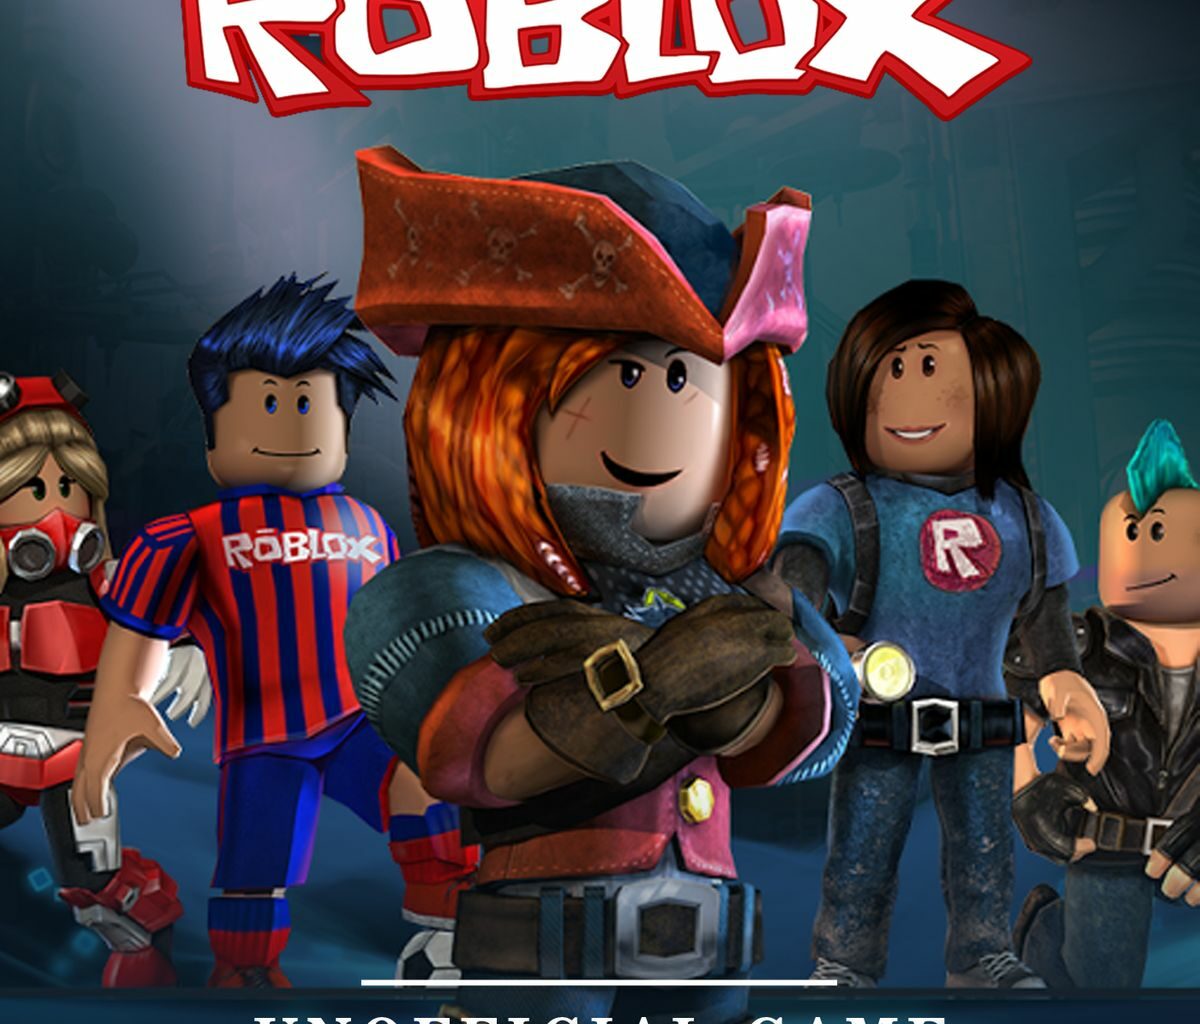 can you play roblox on a ps4